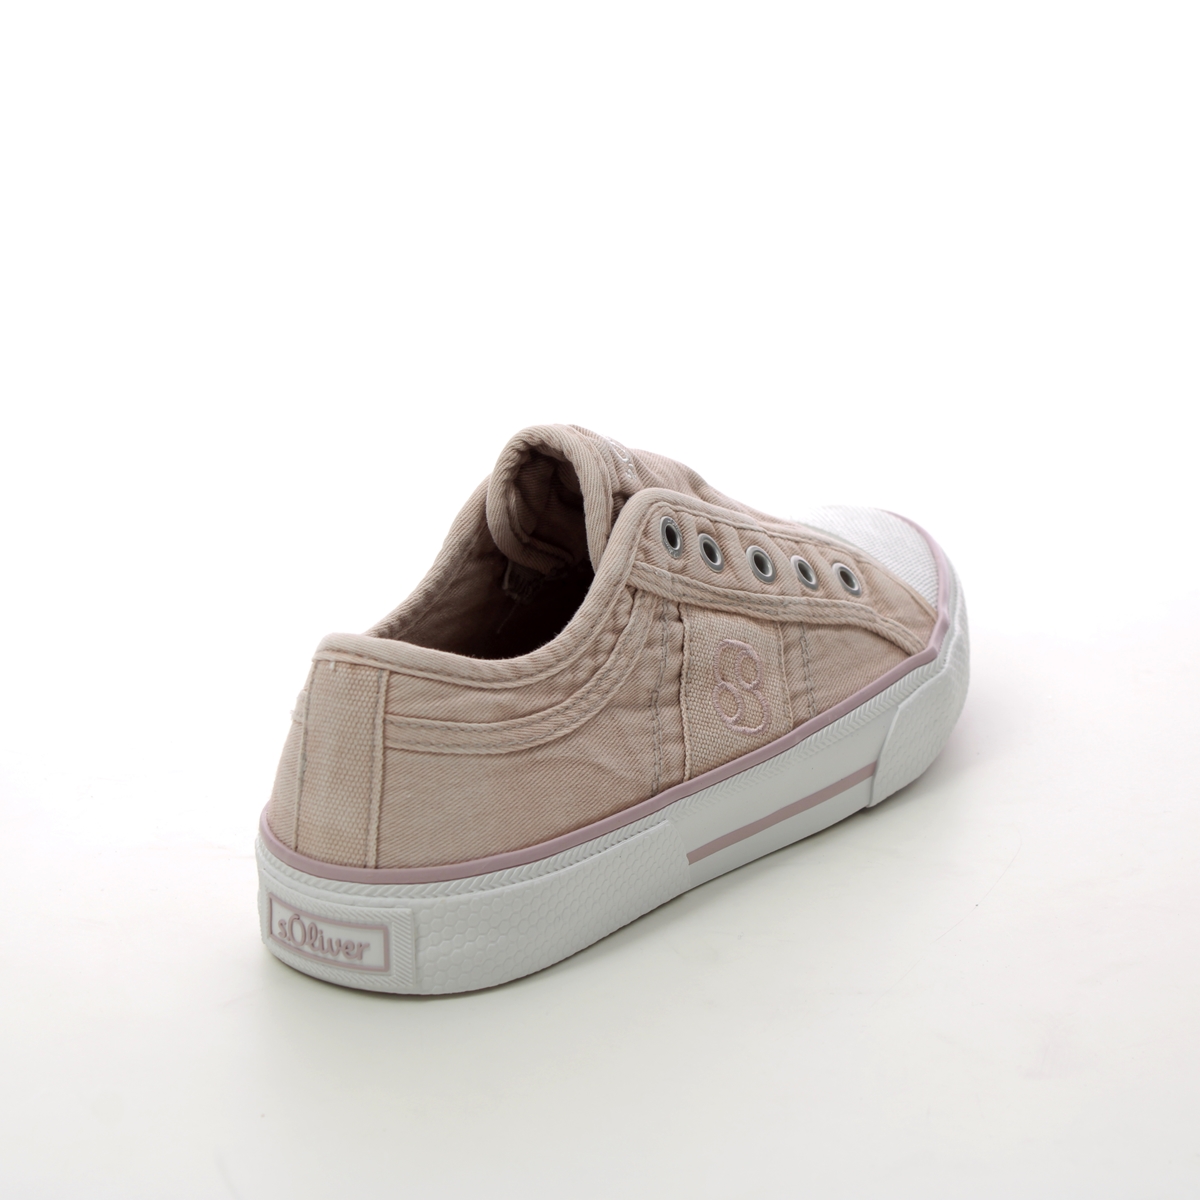 S Oliver Mustang 31 Rose pink Womens trainers 24635-30544